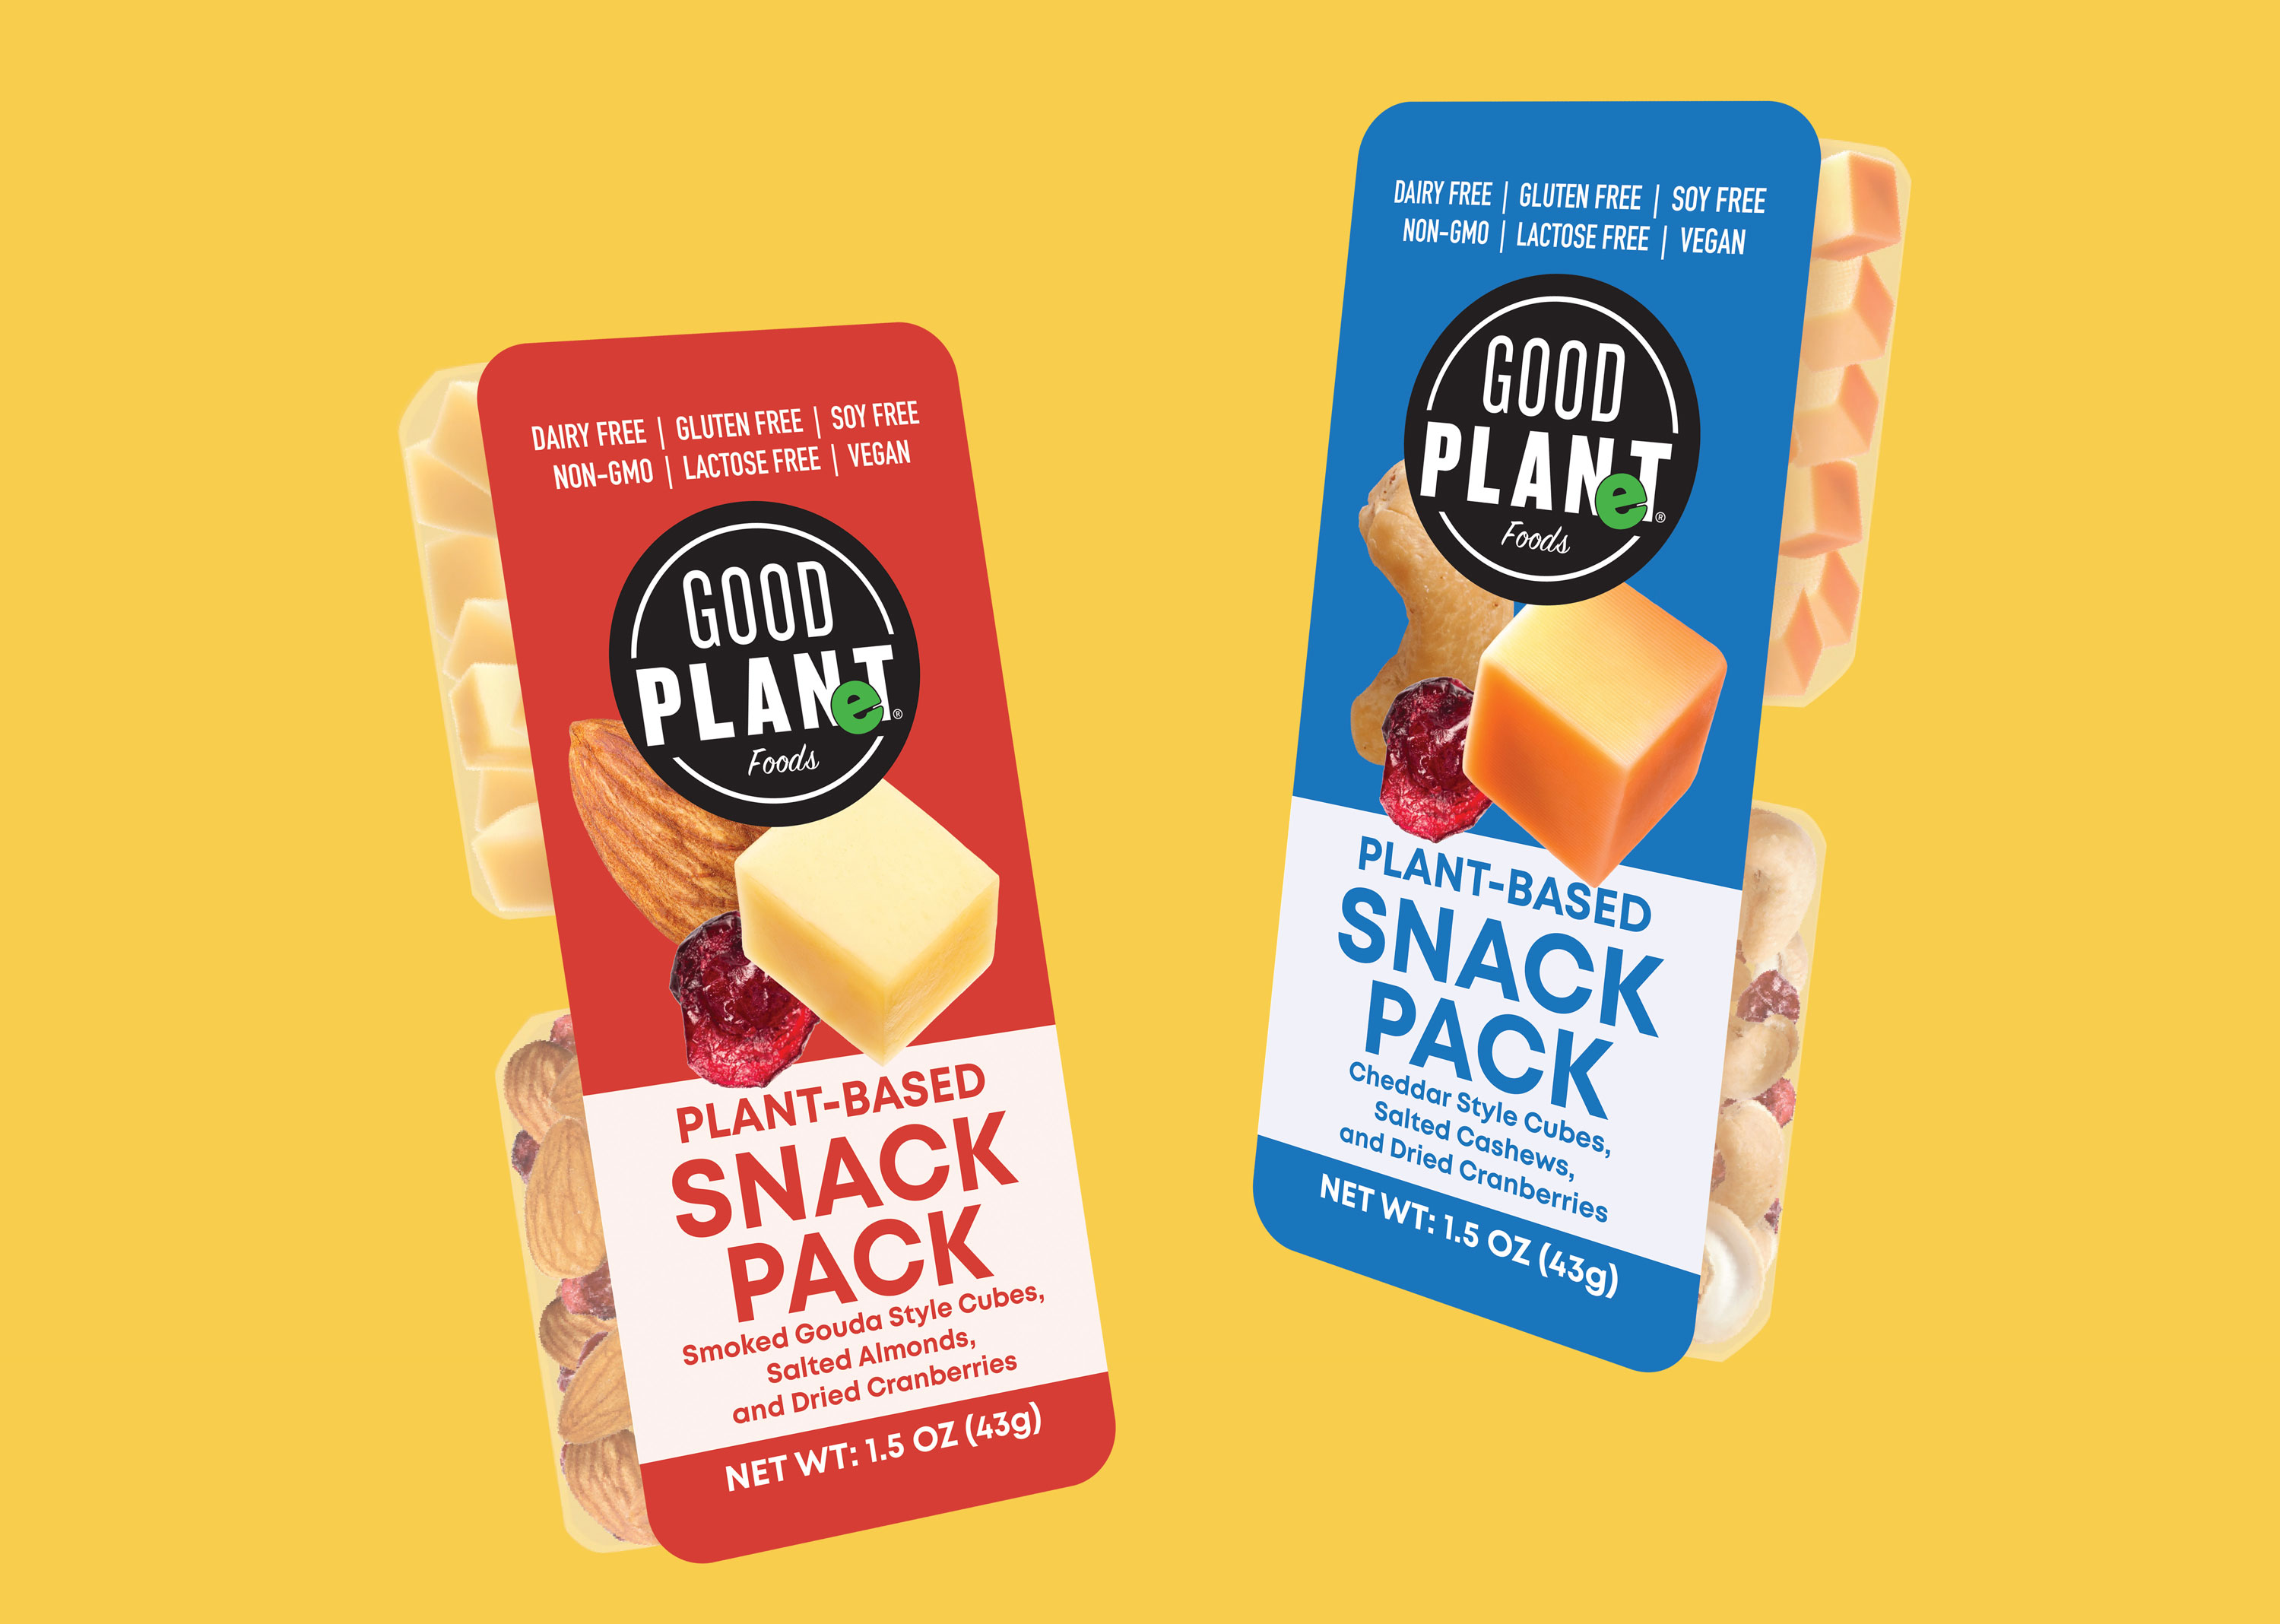 Cheese Snack Packs, Lunchables, and Extra Vegan Meals Information of the Week